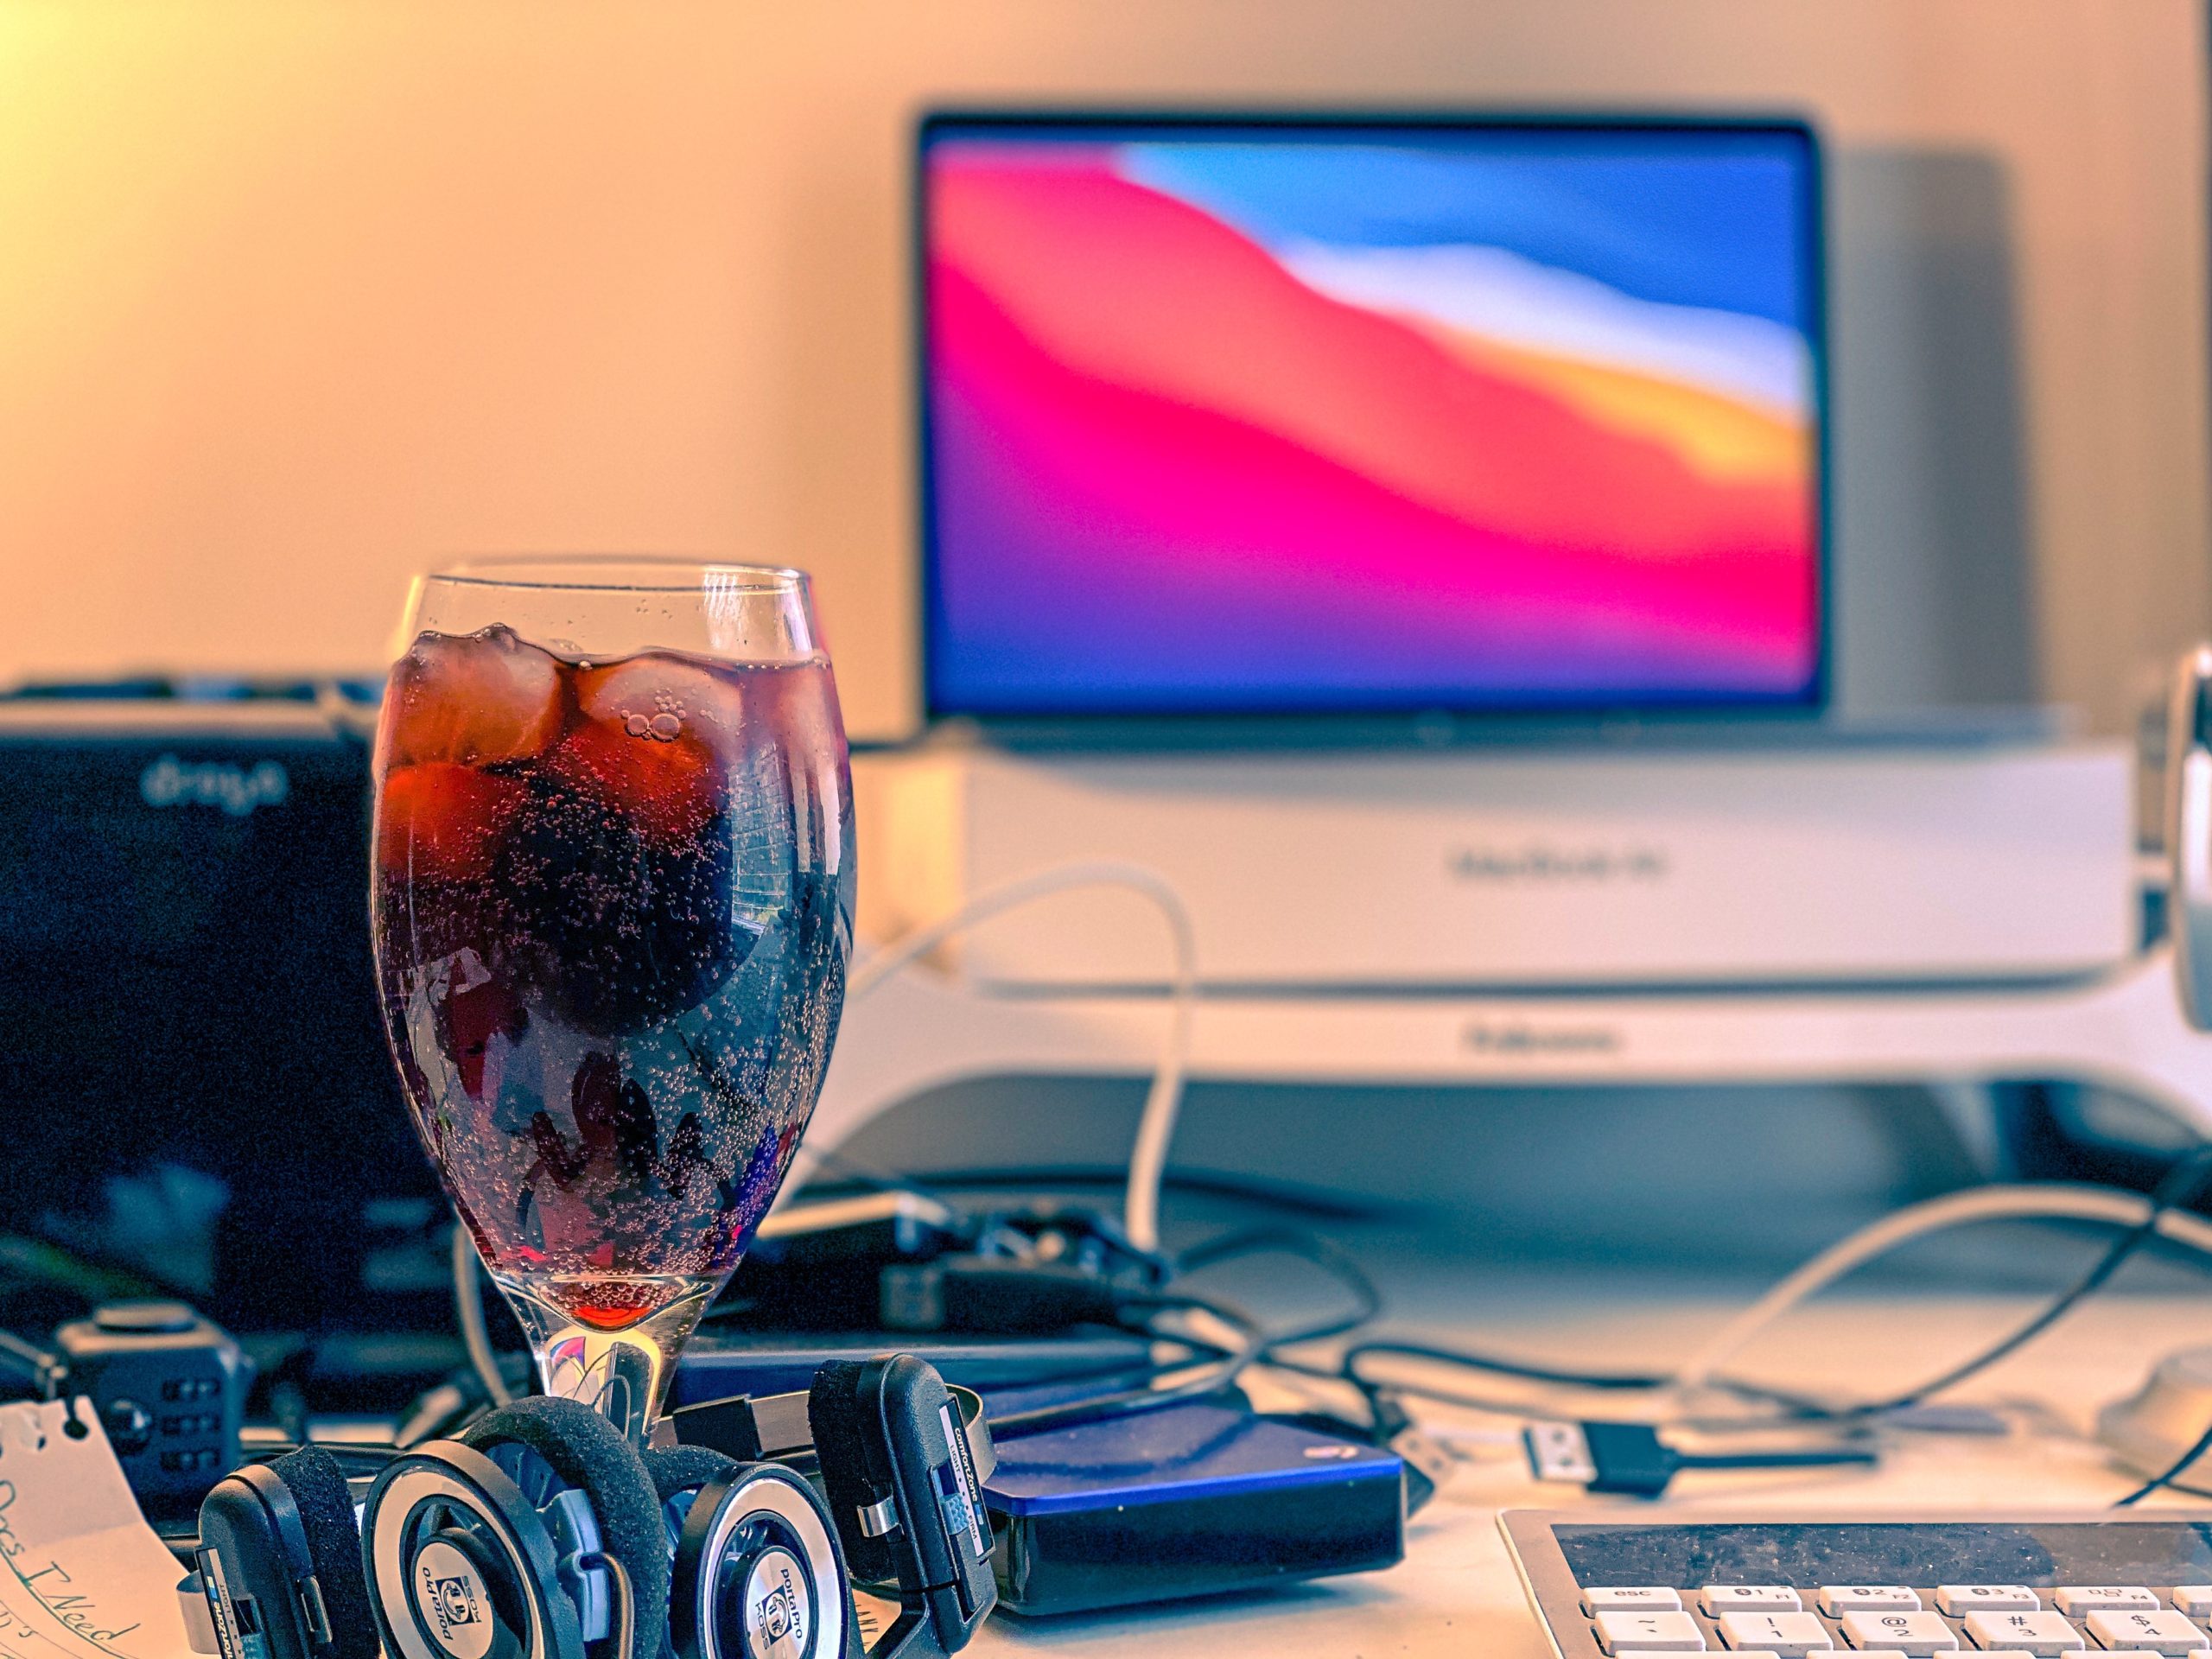 Glass goblet full of maroon bubbly liquid and ice in front of a laptop computer on a stand and other computer equipment